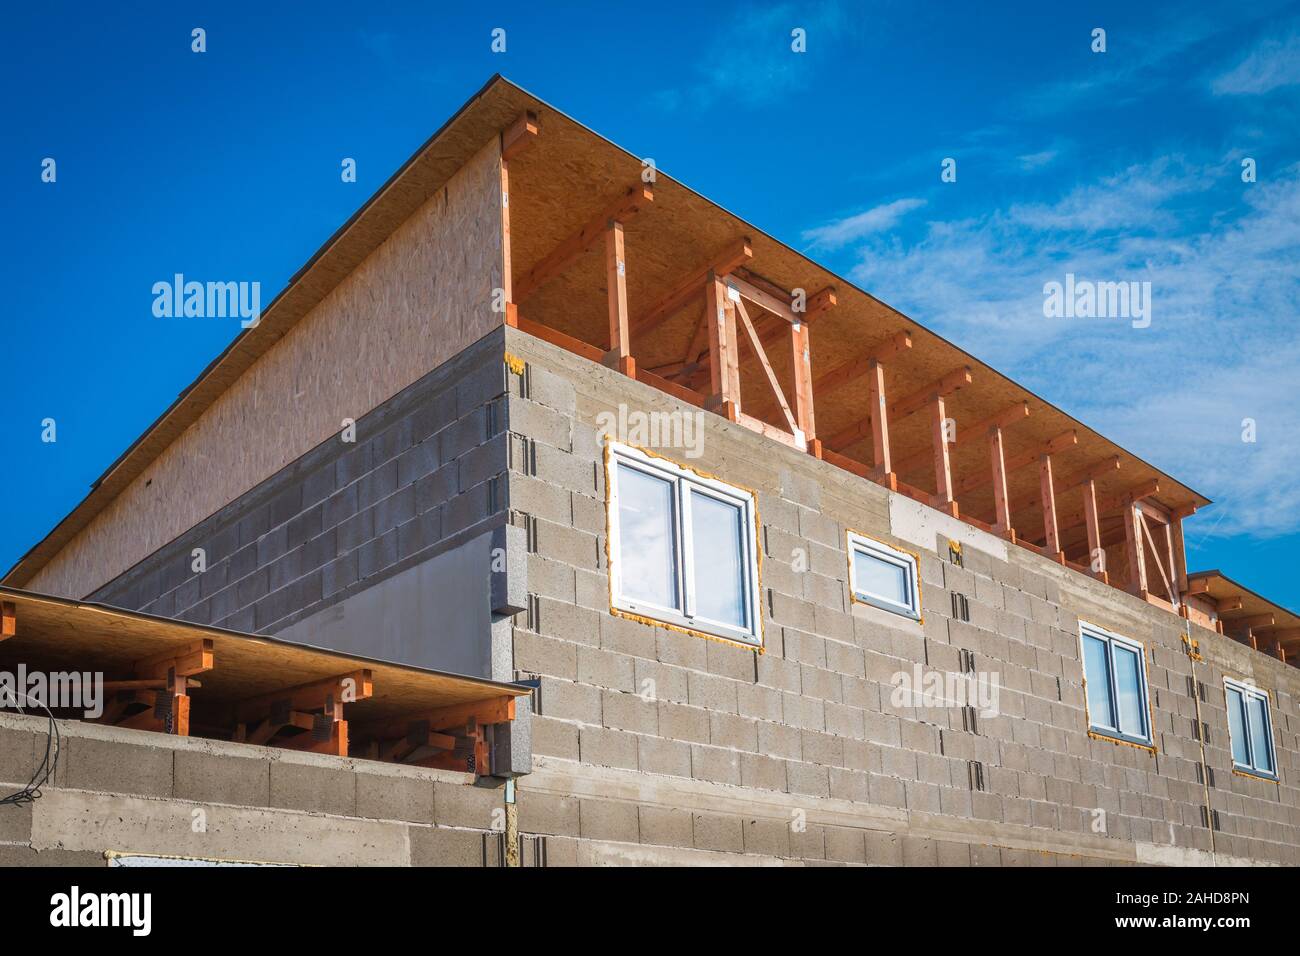 Roof construction - installation of wooden beams at house construction site. Building details with wood, timber and metal holders Stock Photo